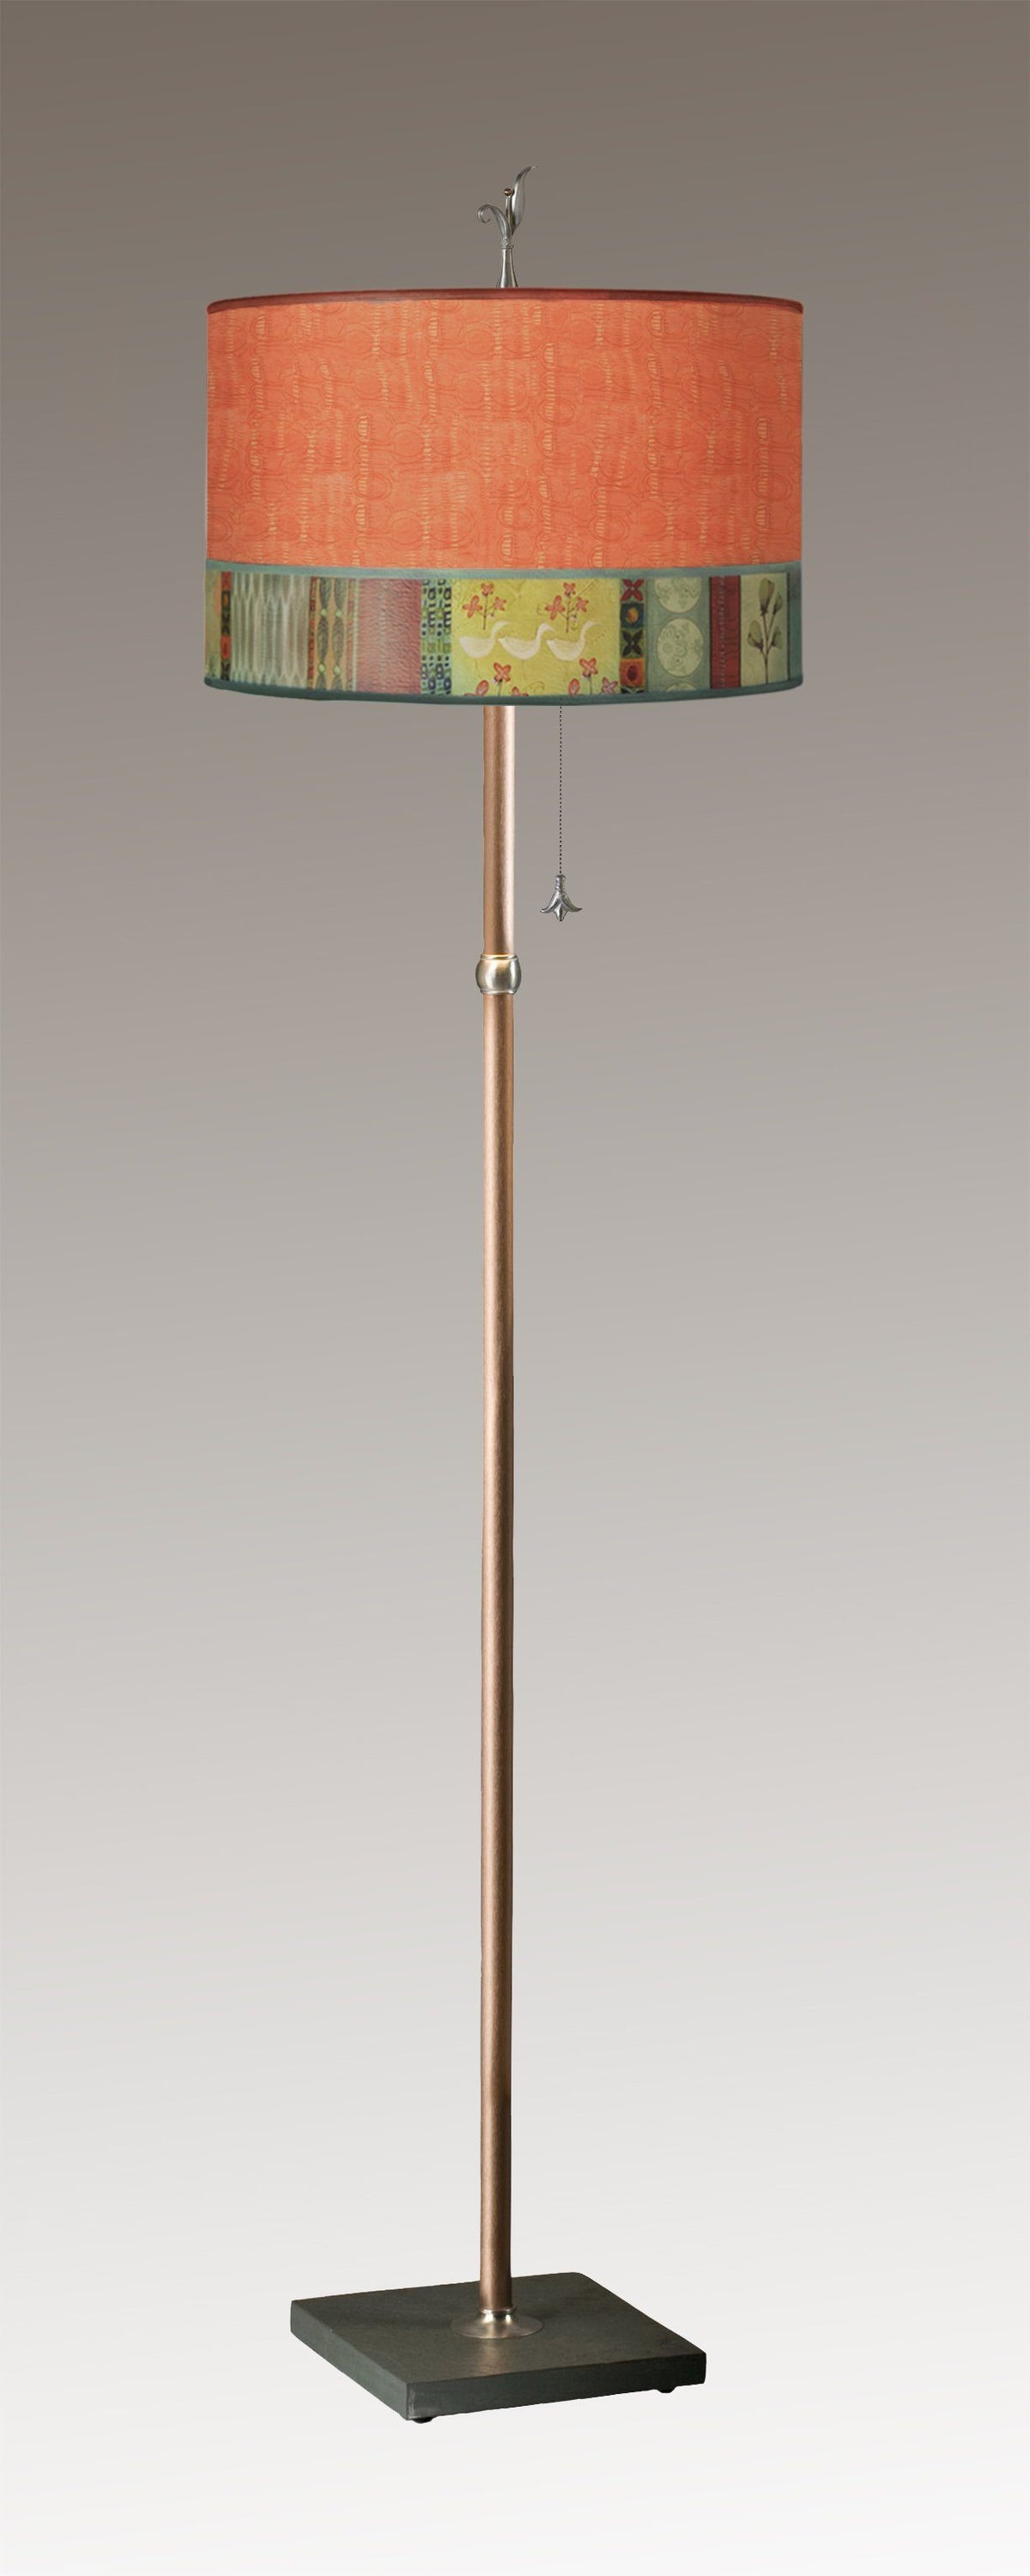 Copper Floor Lamp with Large Drum Lampshade in Melody in Coral